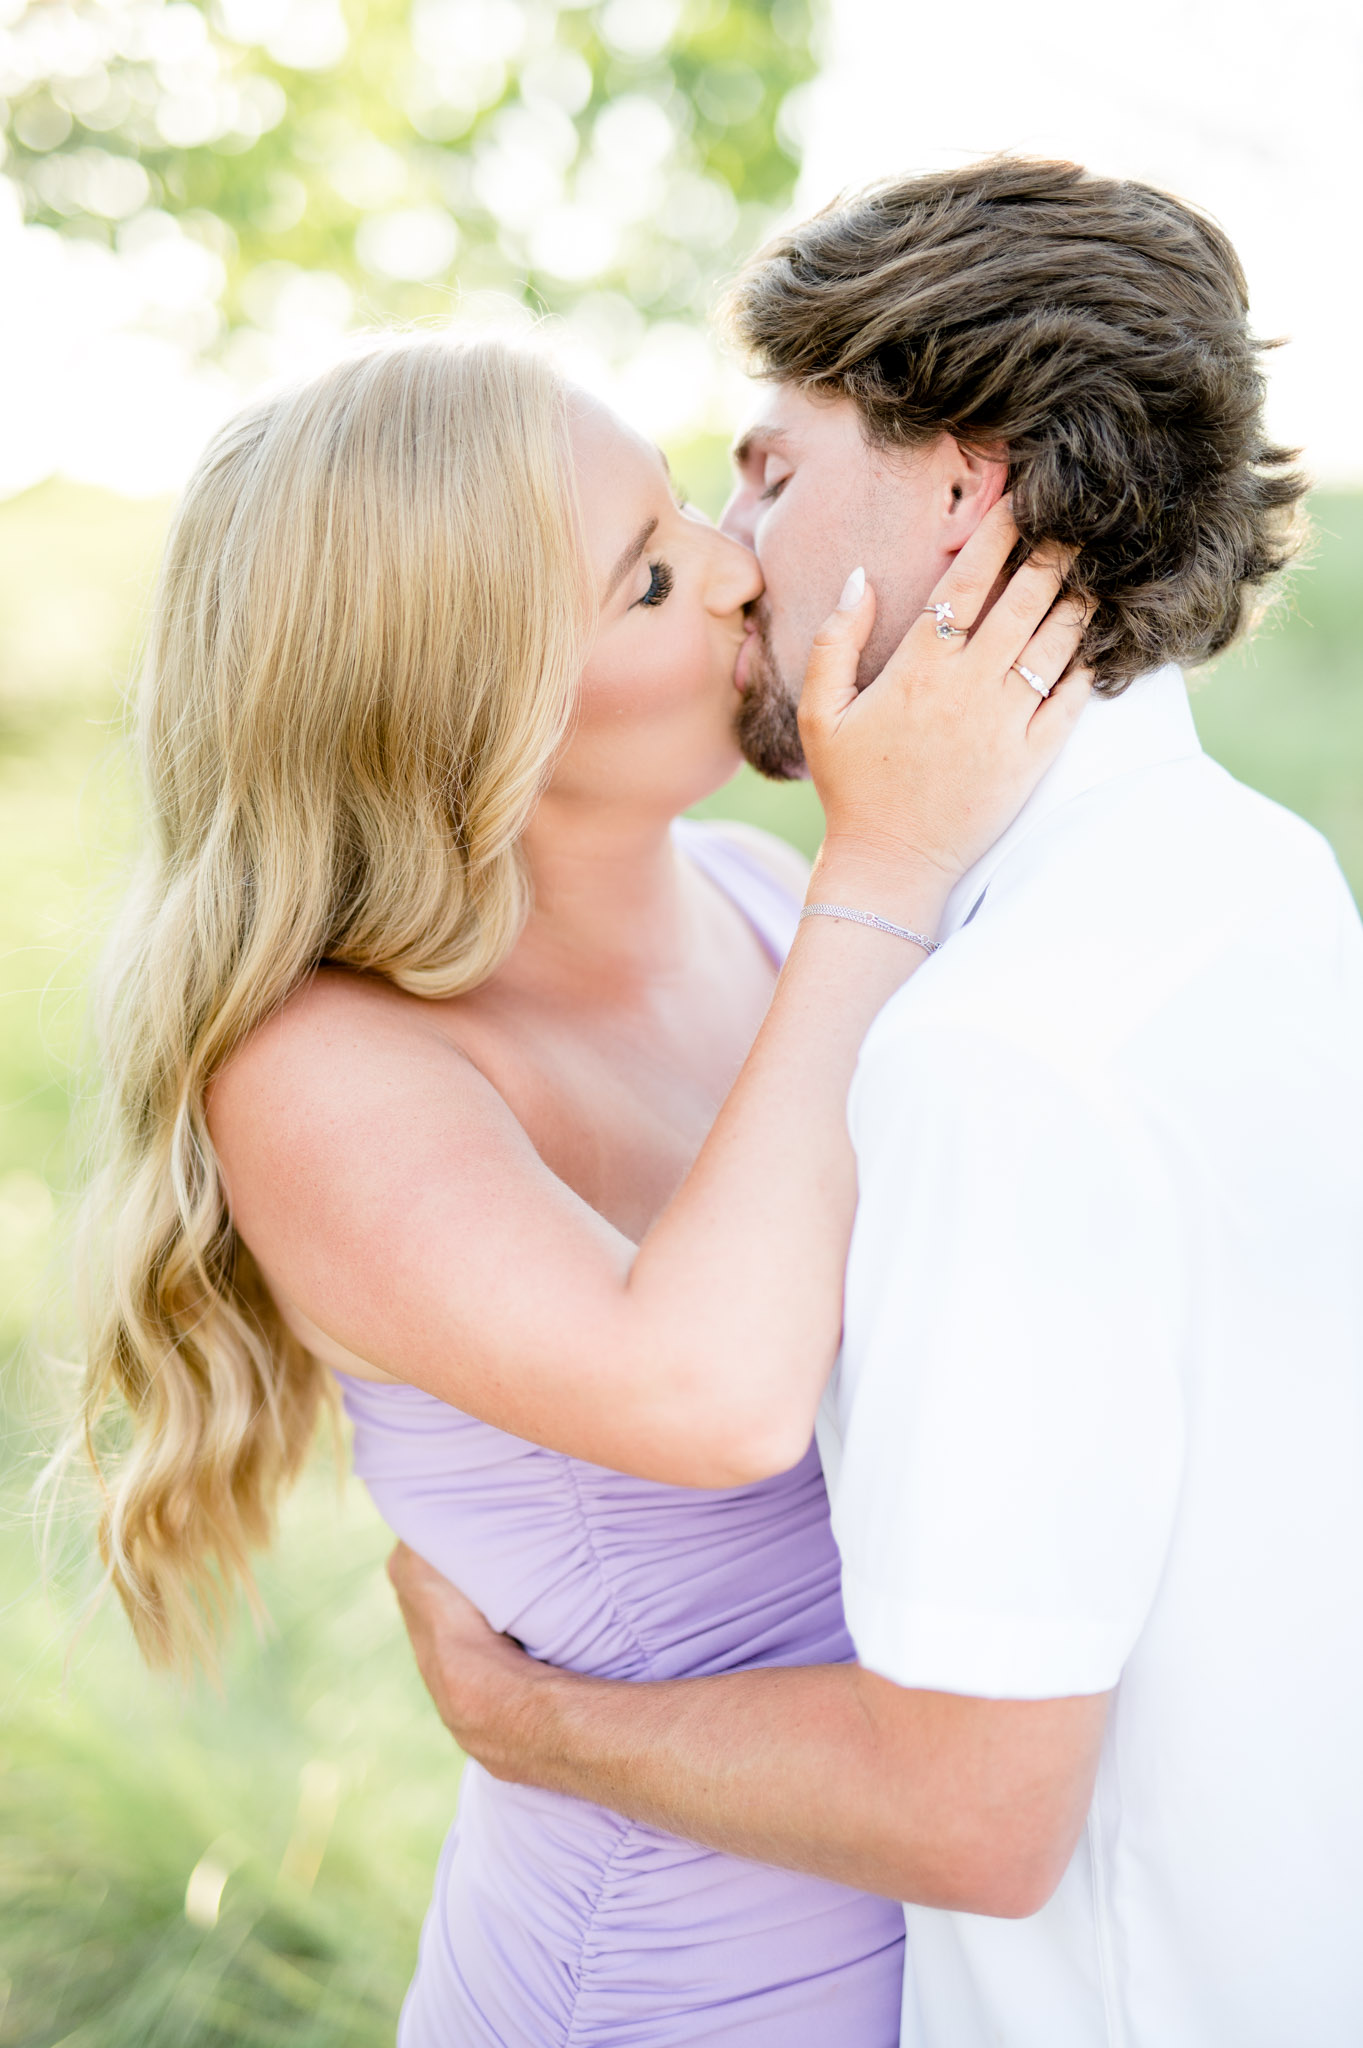 Couple kisses in field.